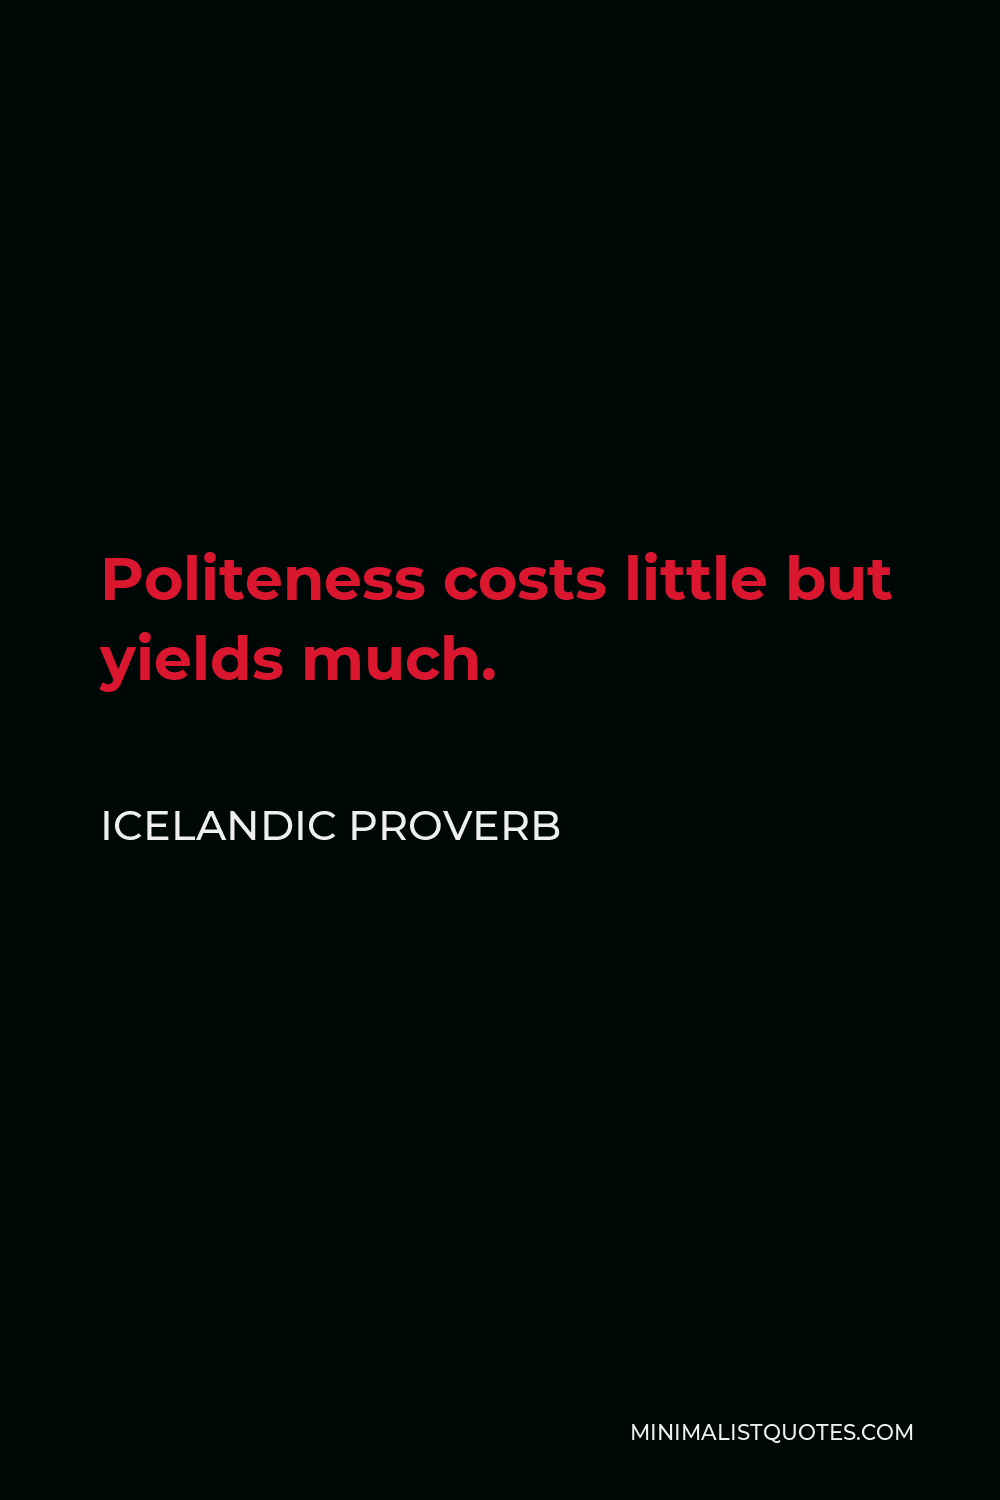 Icelandic Proverb Quote - Politeness costs little but yields much.